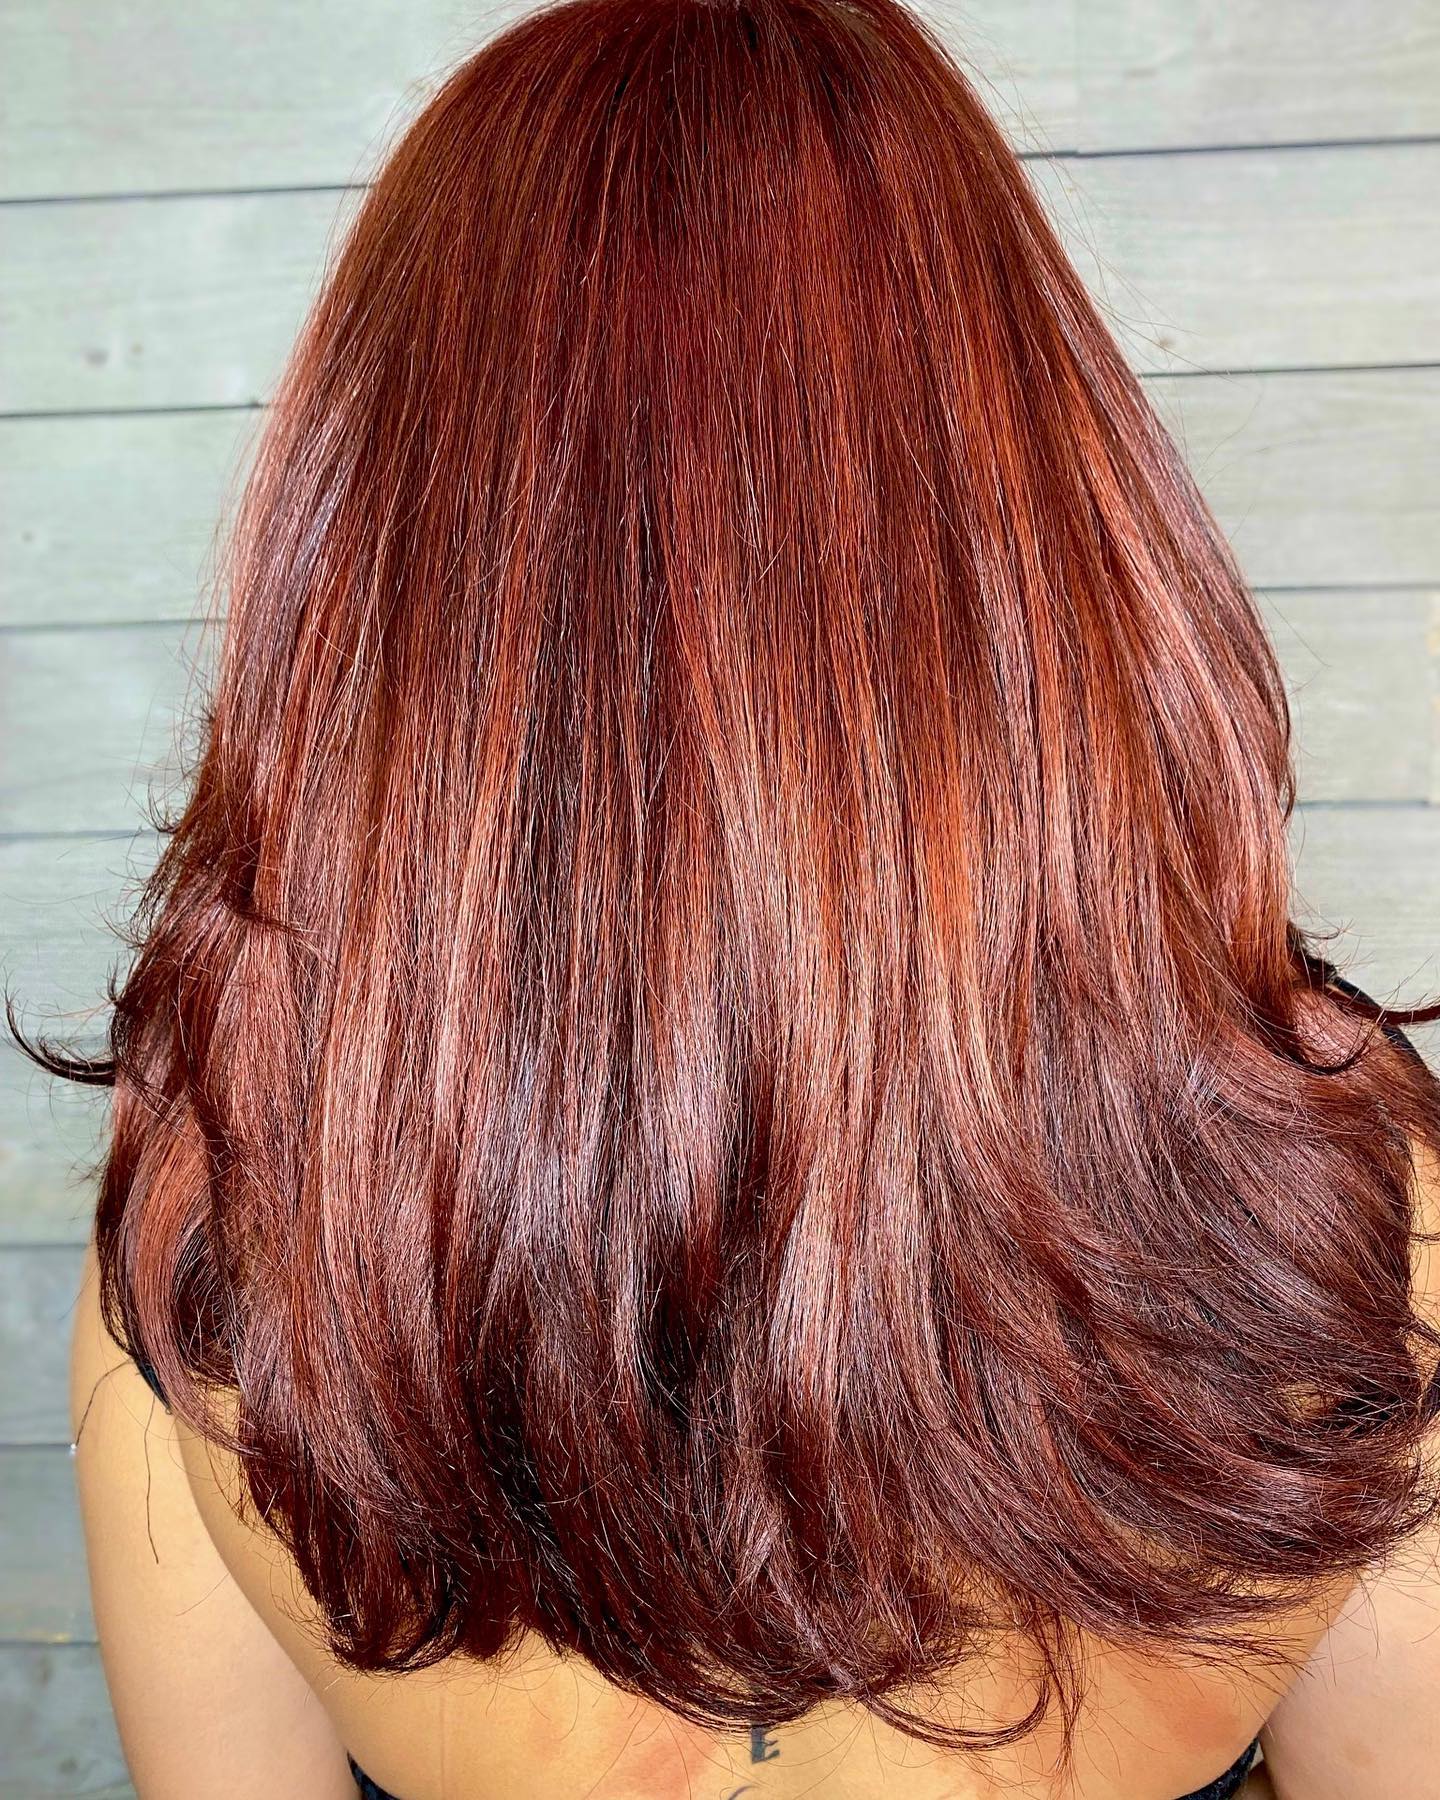 red ombre hair style 38 Natural red ombre hair | Red ombre background | Red ombre hair Red Ombre Hairstyles